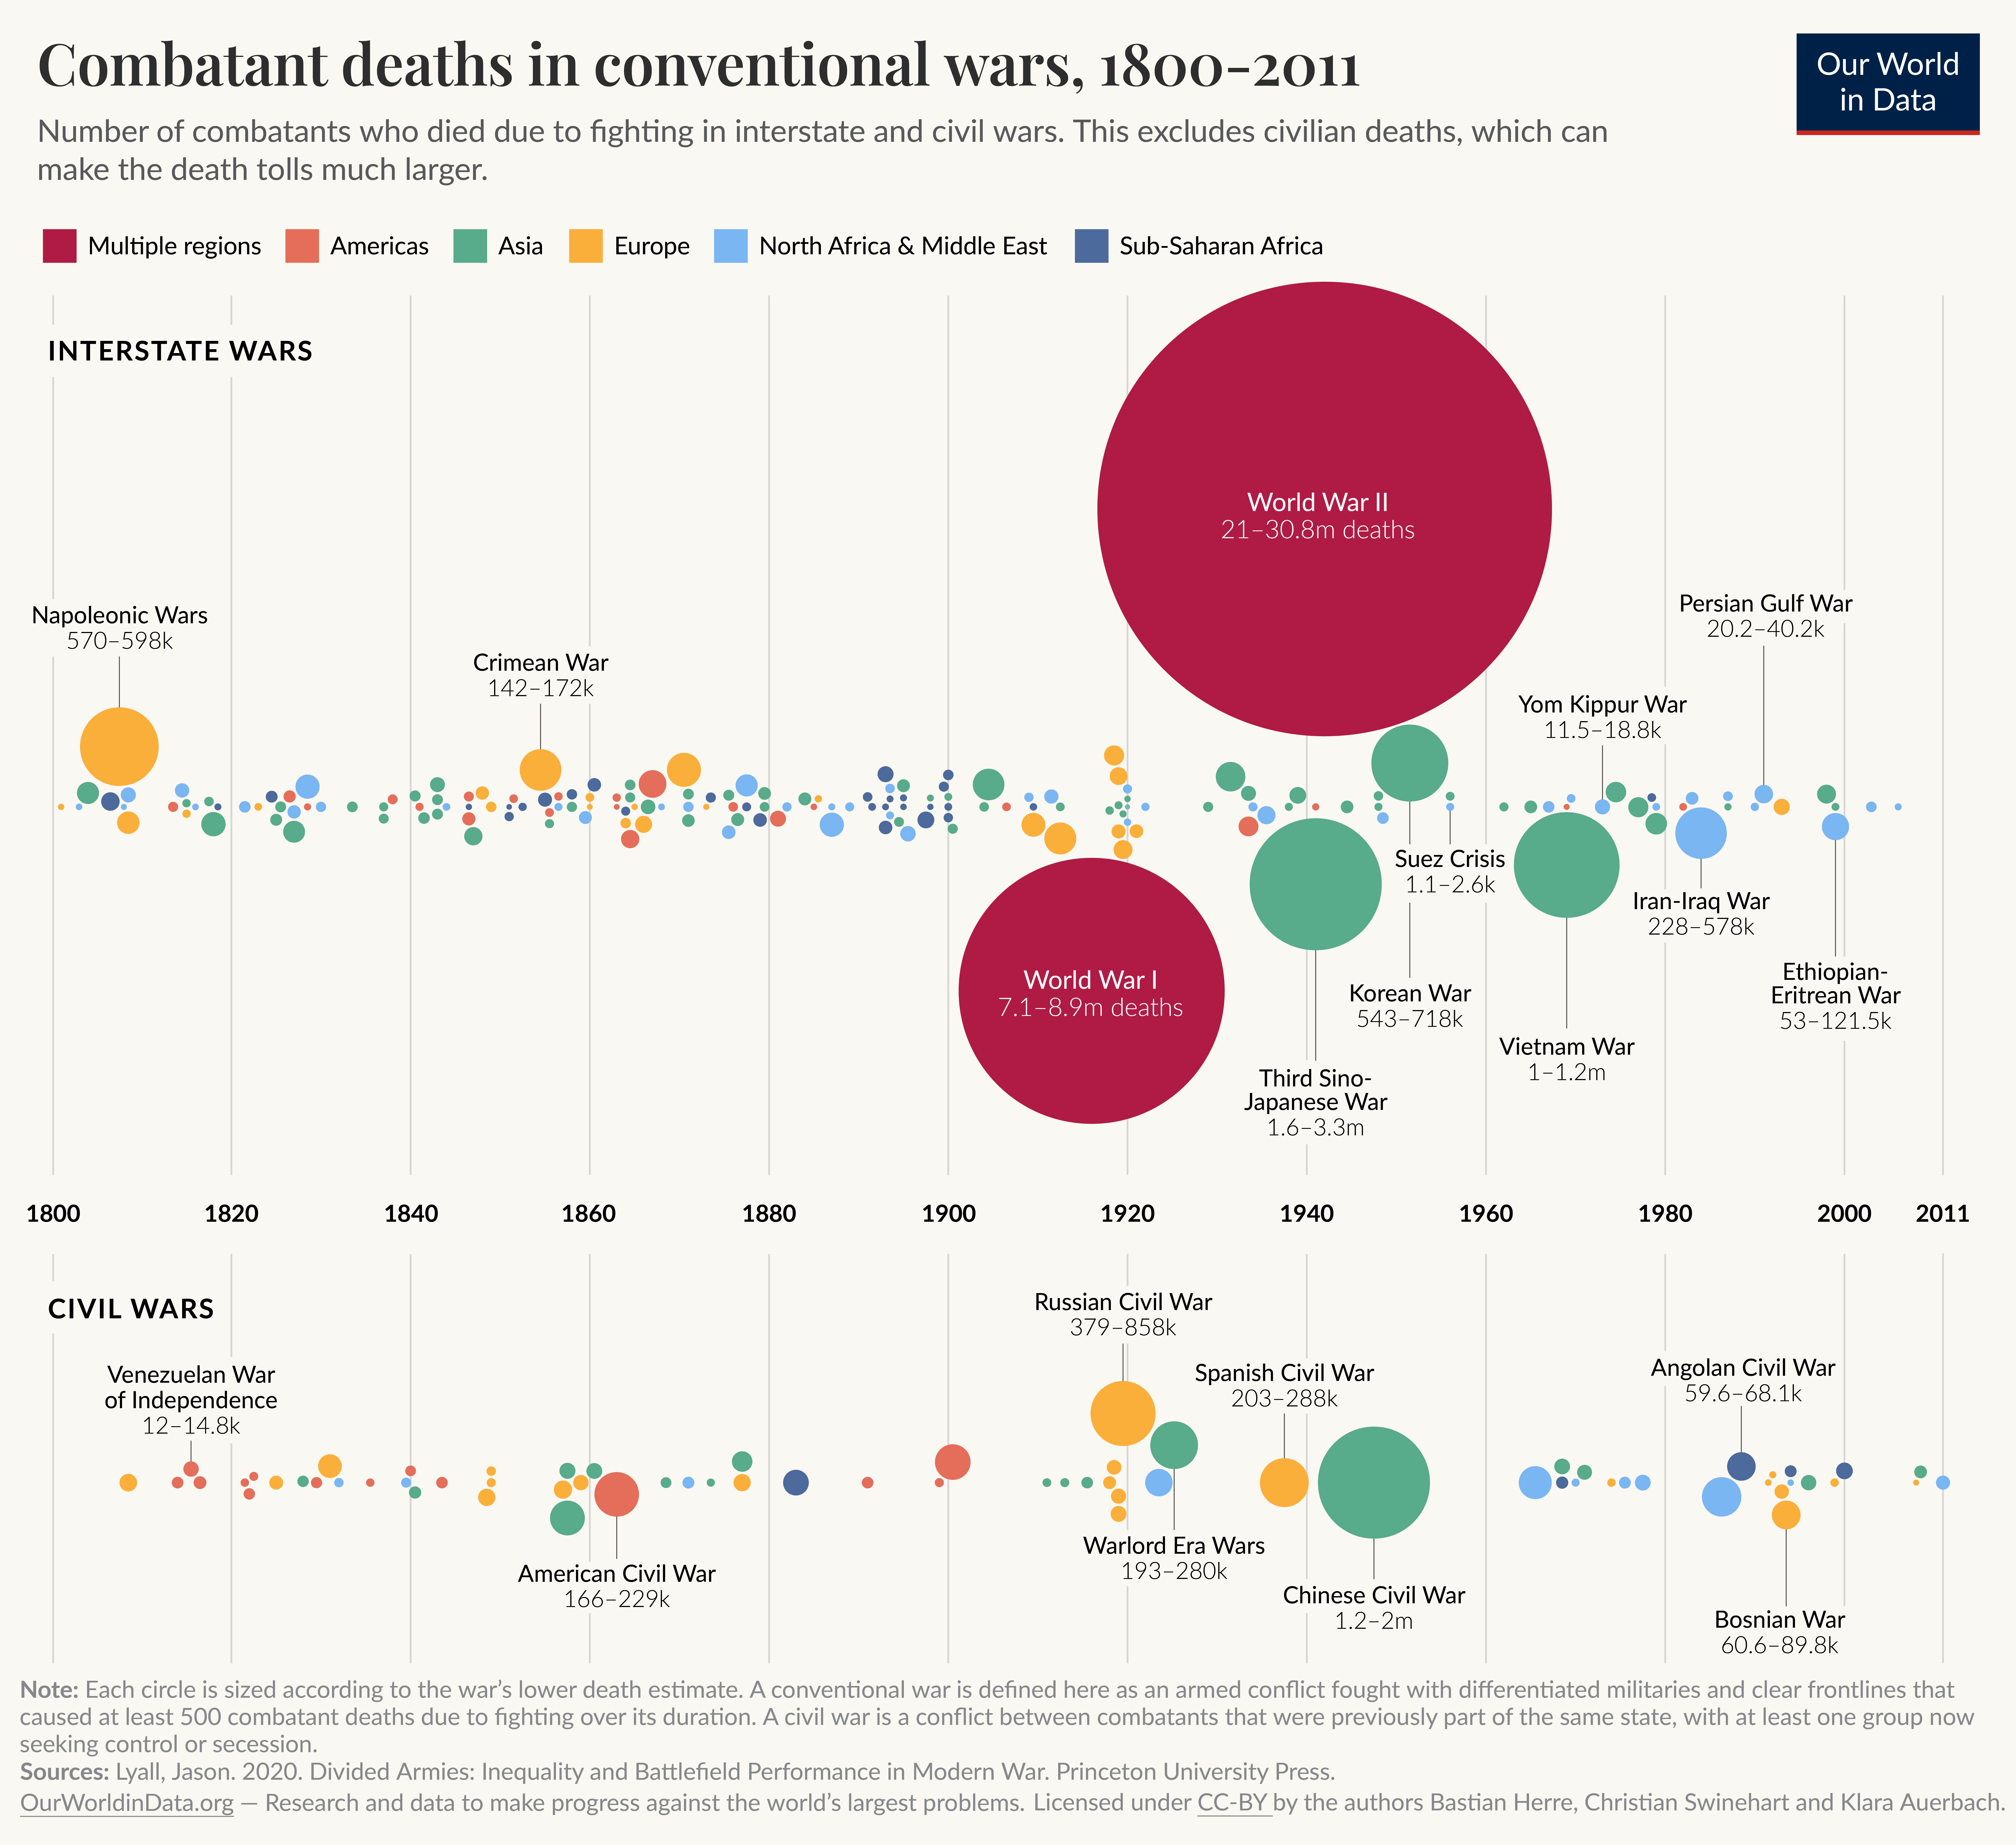 Beeswarm plot in landscape format showing that most combatants in conventional wars over the last two hundred years have died in a few, very deadly conflicts.